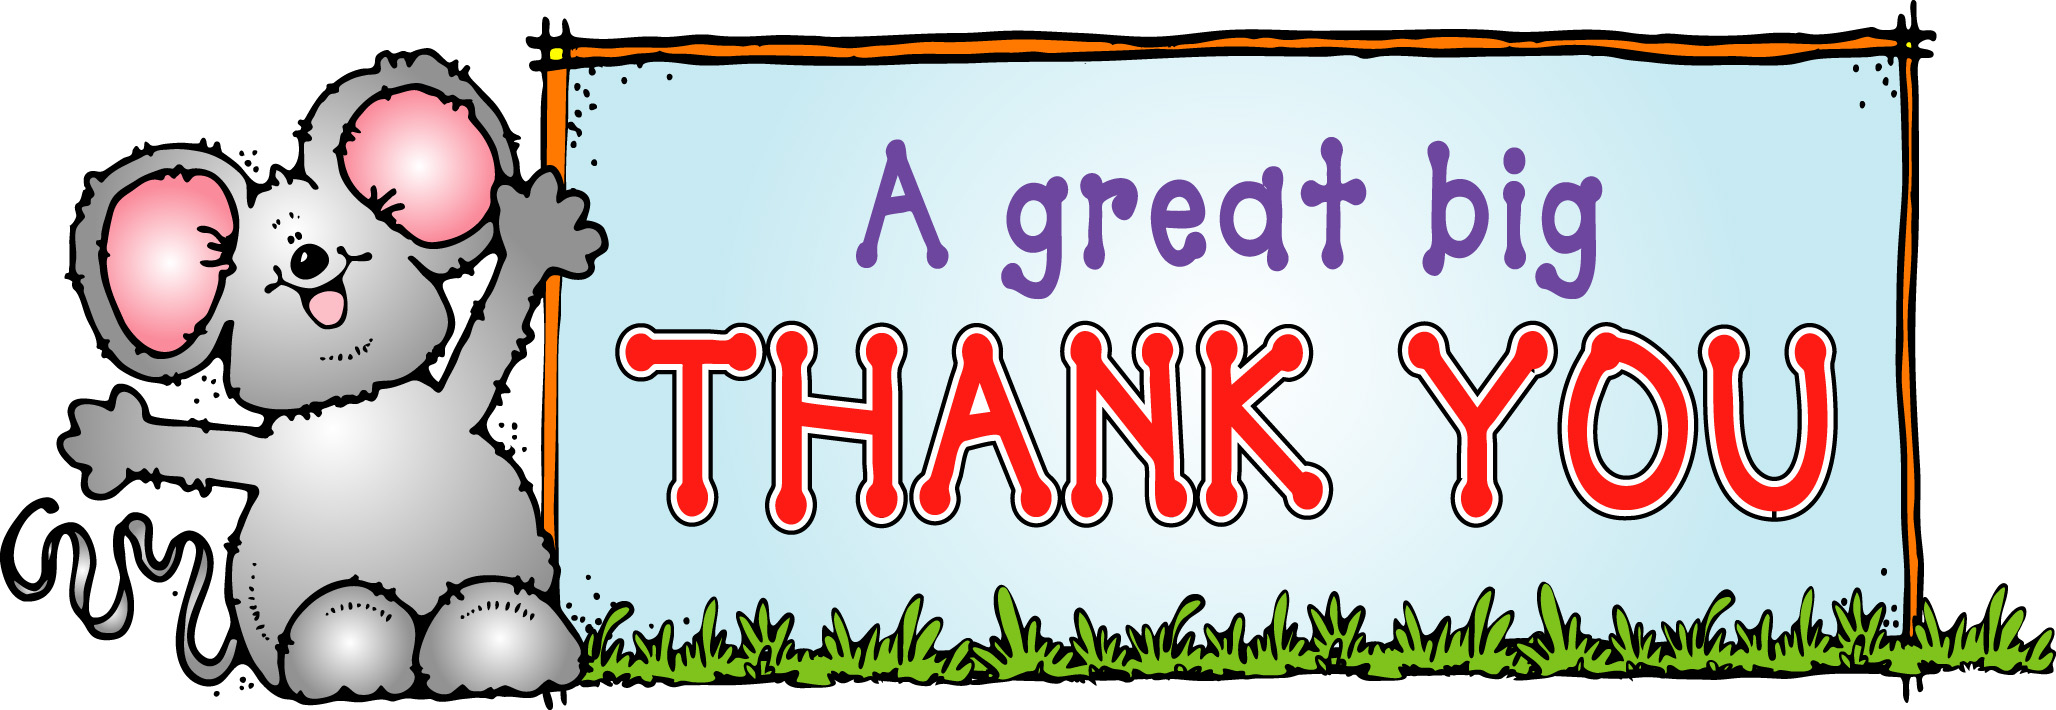 Business thank you clipart free clip art images